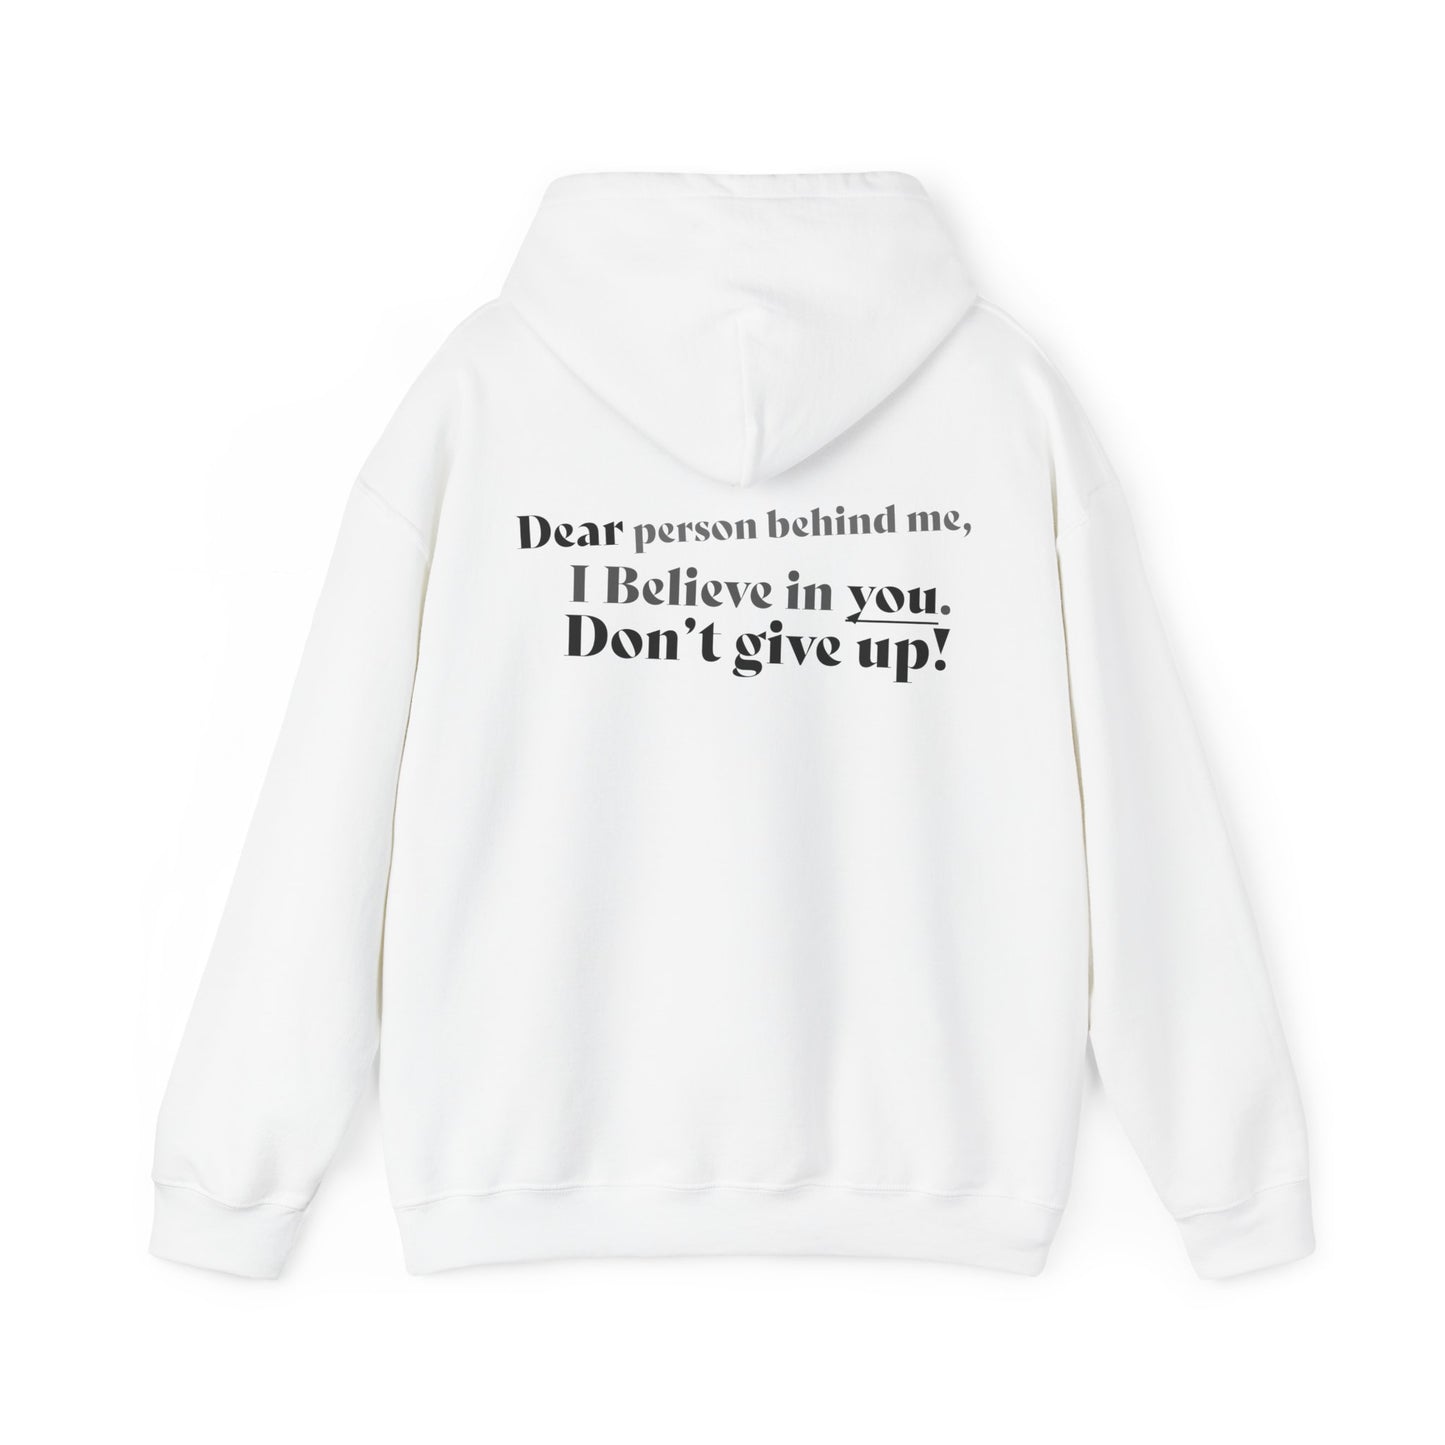 Toriano Tate: Don't Give Up Hoodie